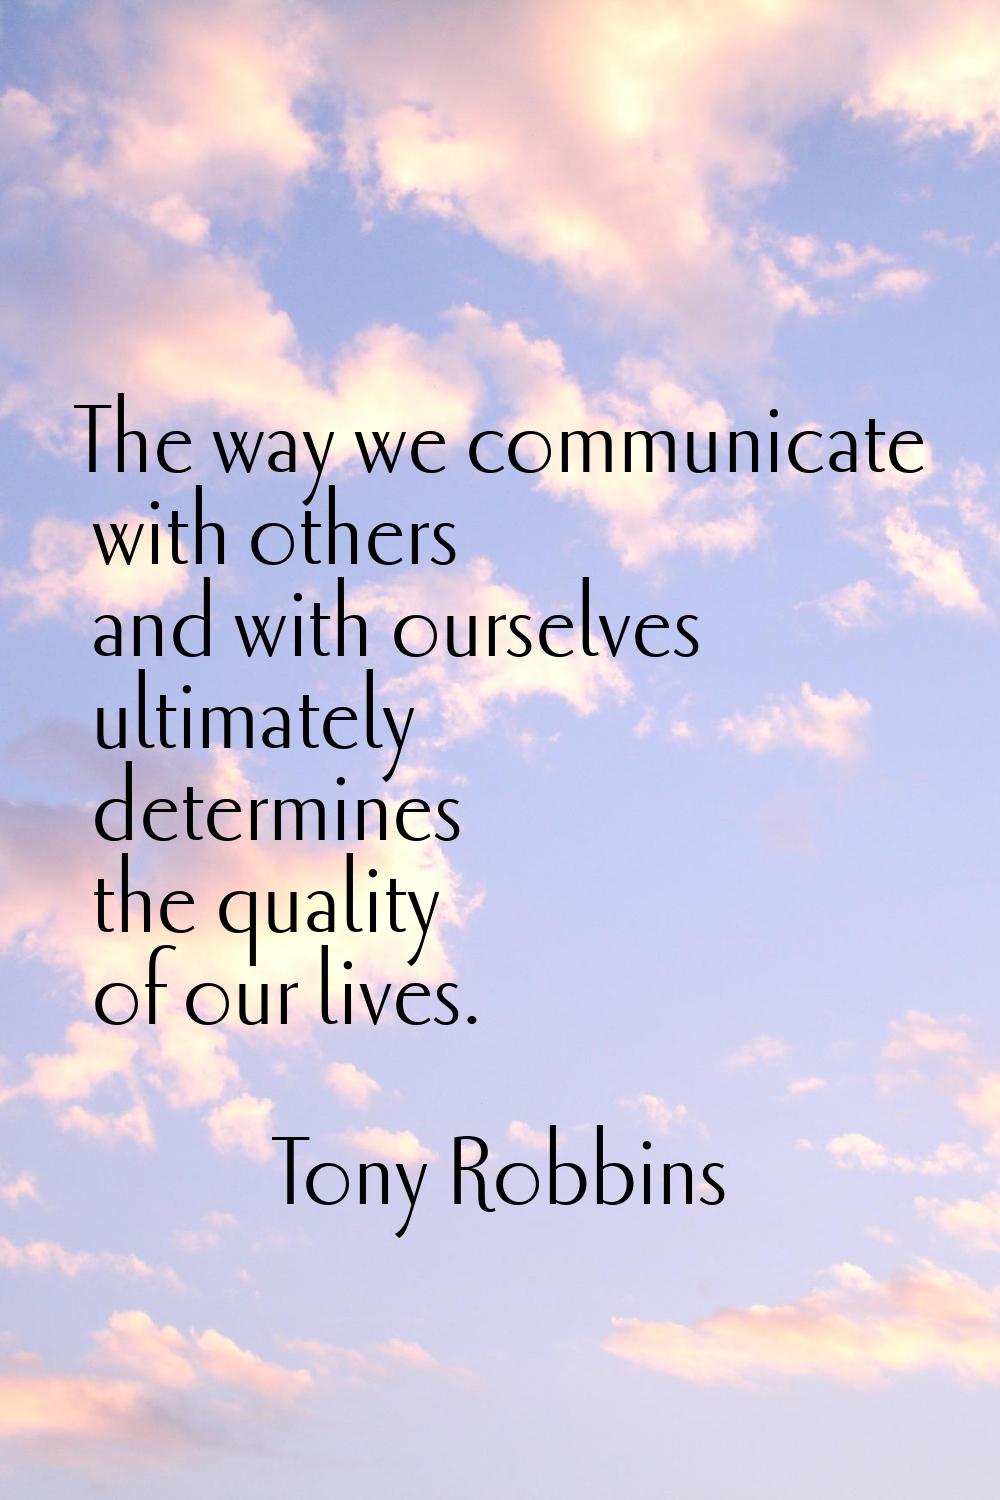 The way we communicate with others and with ourselves ultimately determines the quality of our live